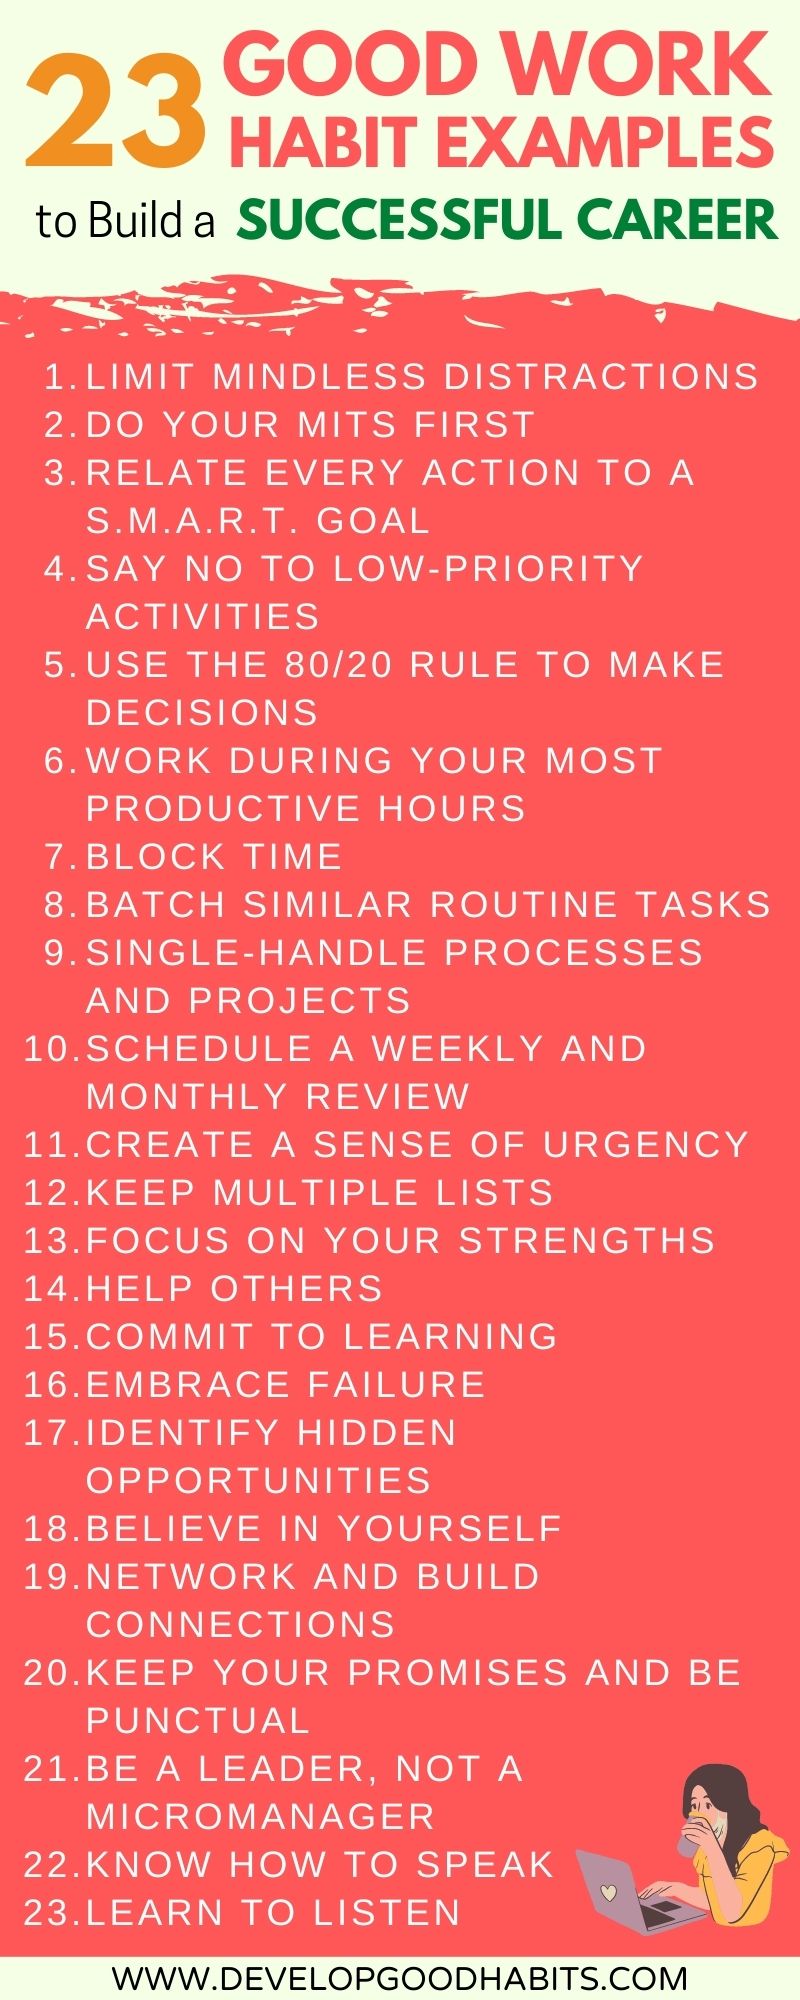 23 Good Work Habit Examples to Build a Successful Career